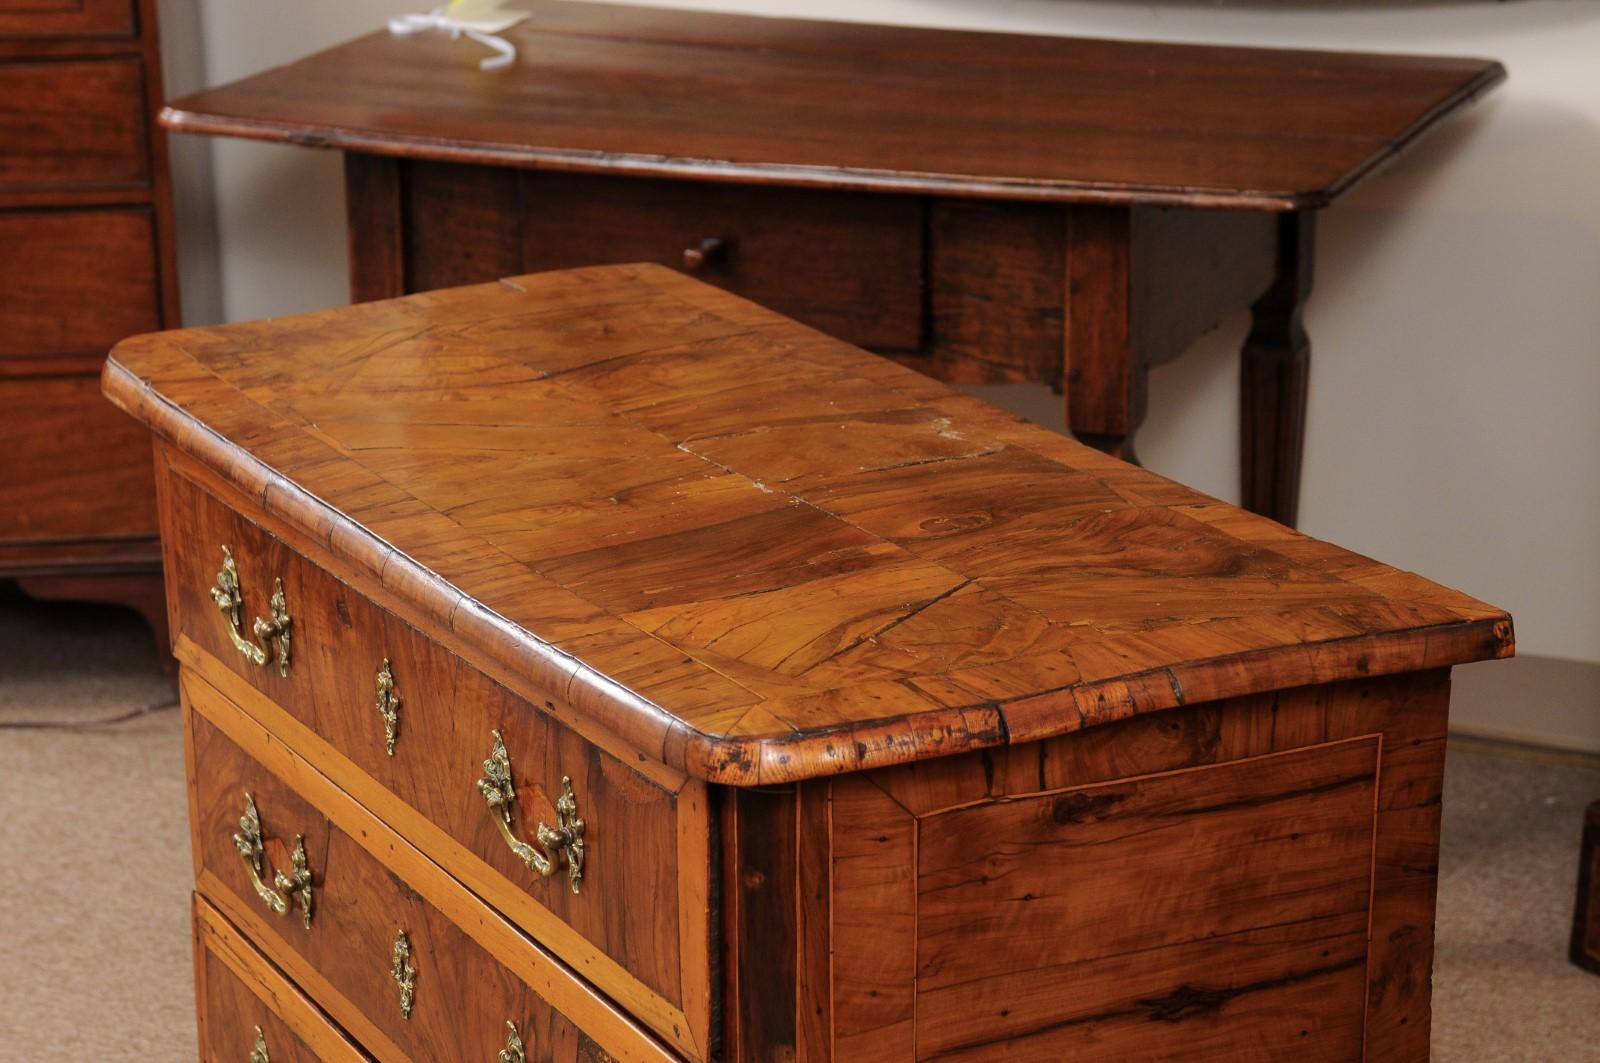 18th Century Italian 3-Drawer Commode in Olivewood with Cabriole Legs For Sale 14